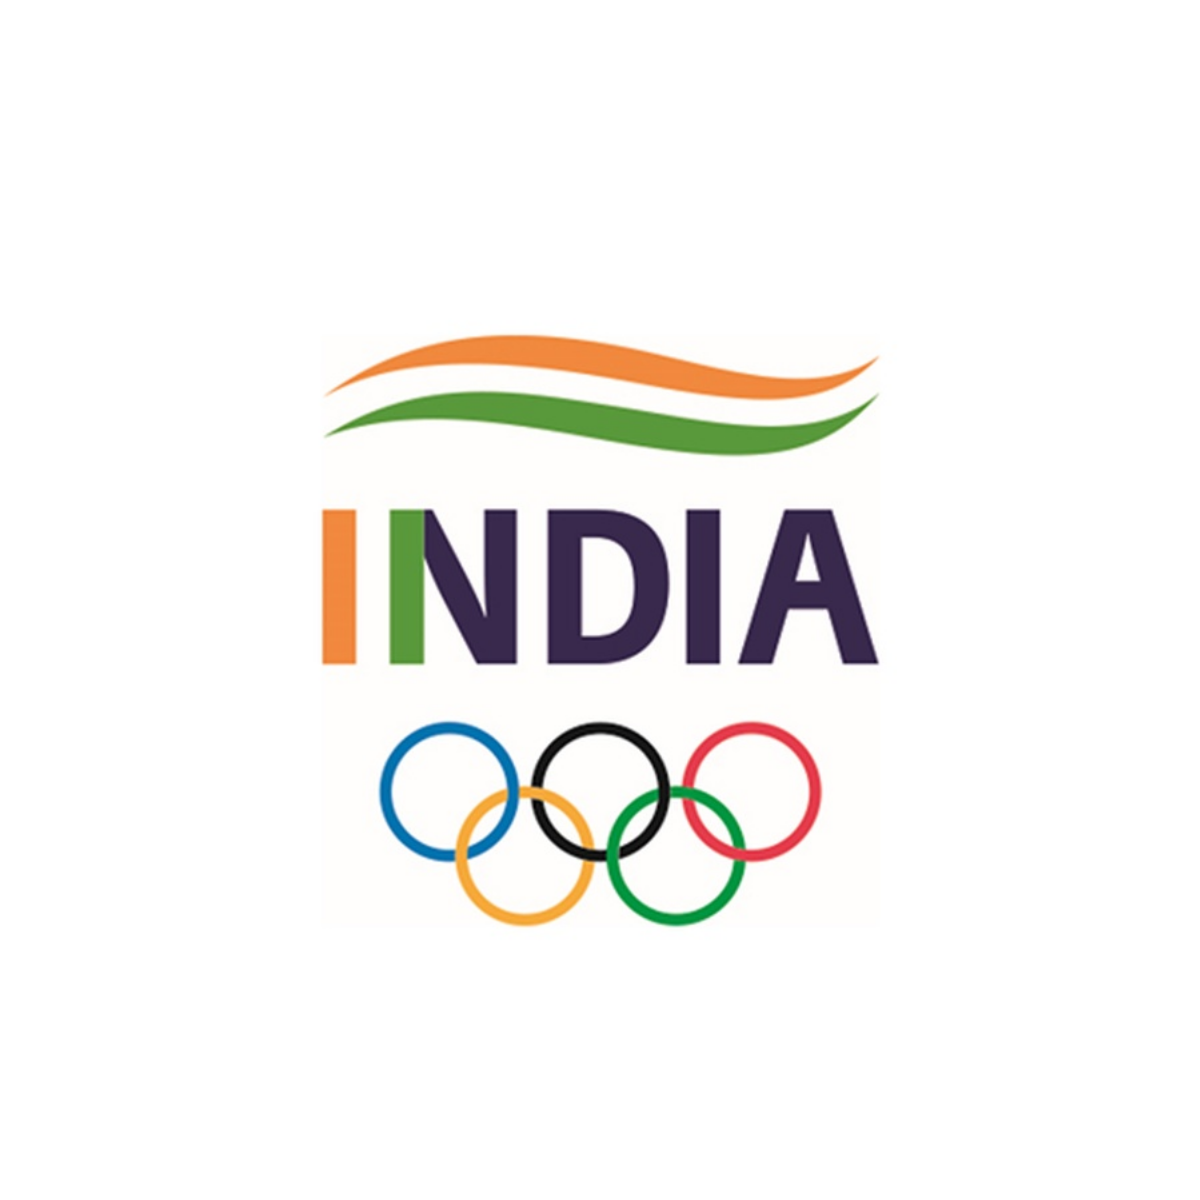 Northeast region has more potential to produce top athletes, says IOA chief Batra